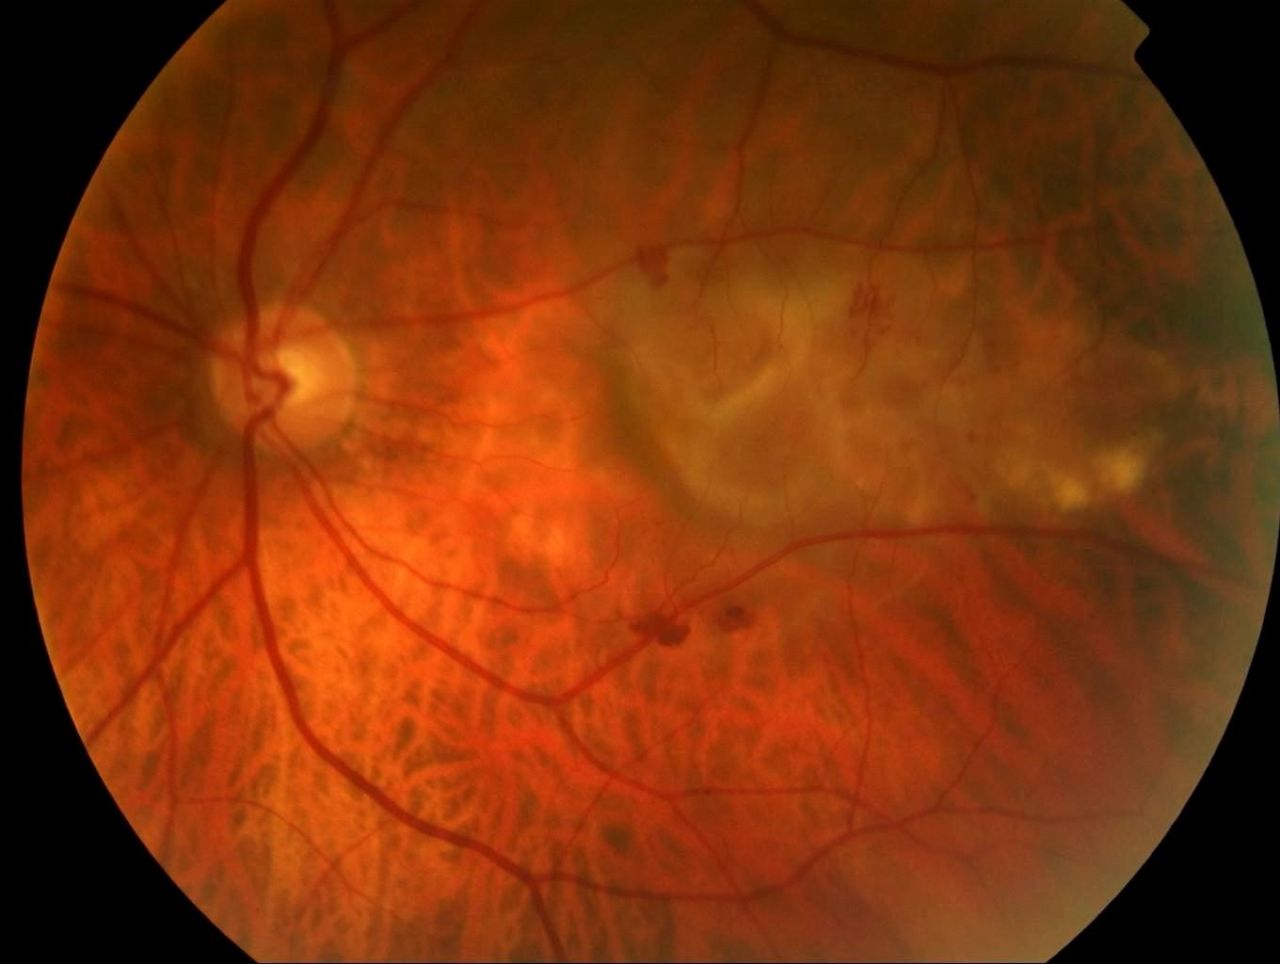 AMD affects an estimated 15 million people in North America and up to 30 million worldwide. Pictured, a severe form of Age-related Macular Degeneration (AMD) seen from the back of the eye. 